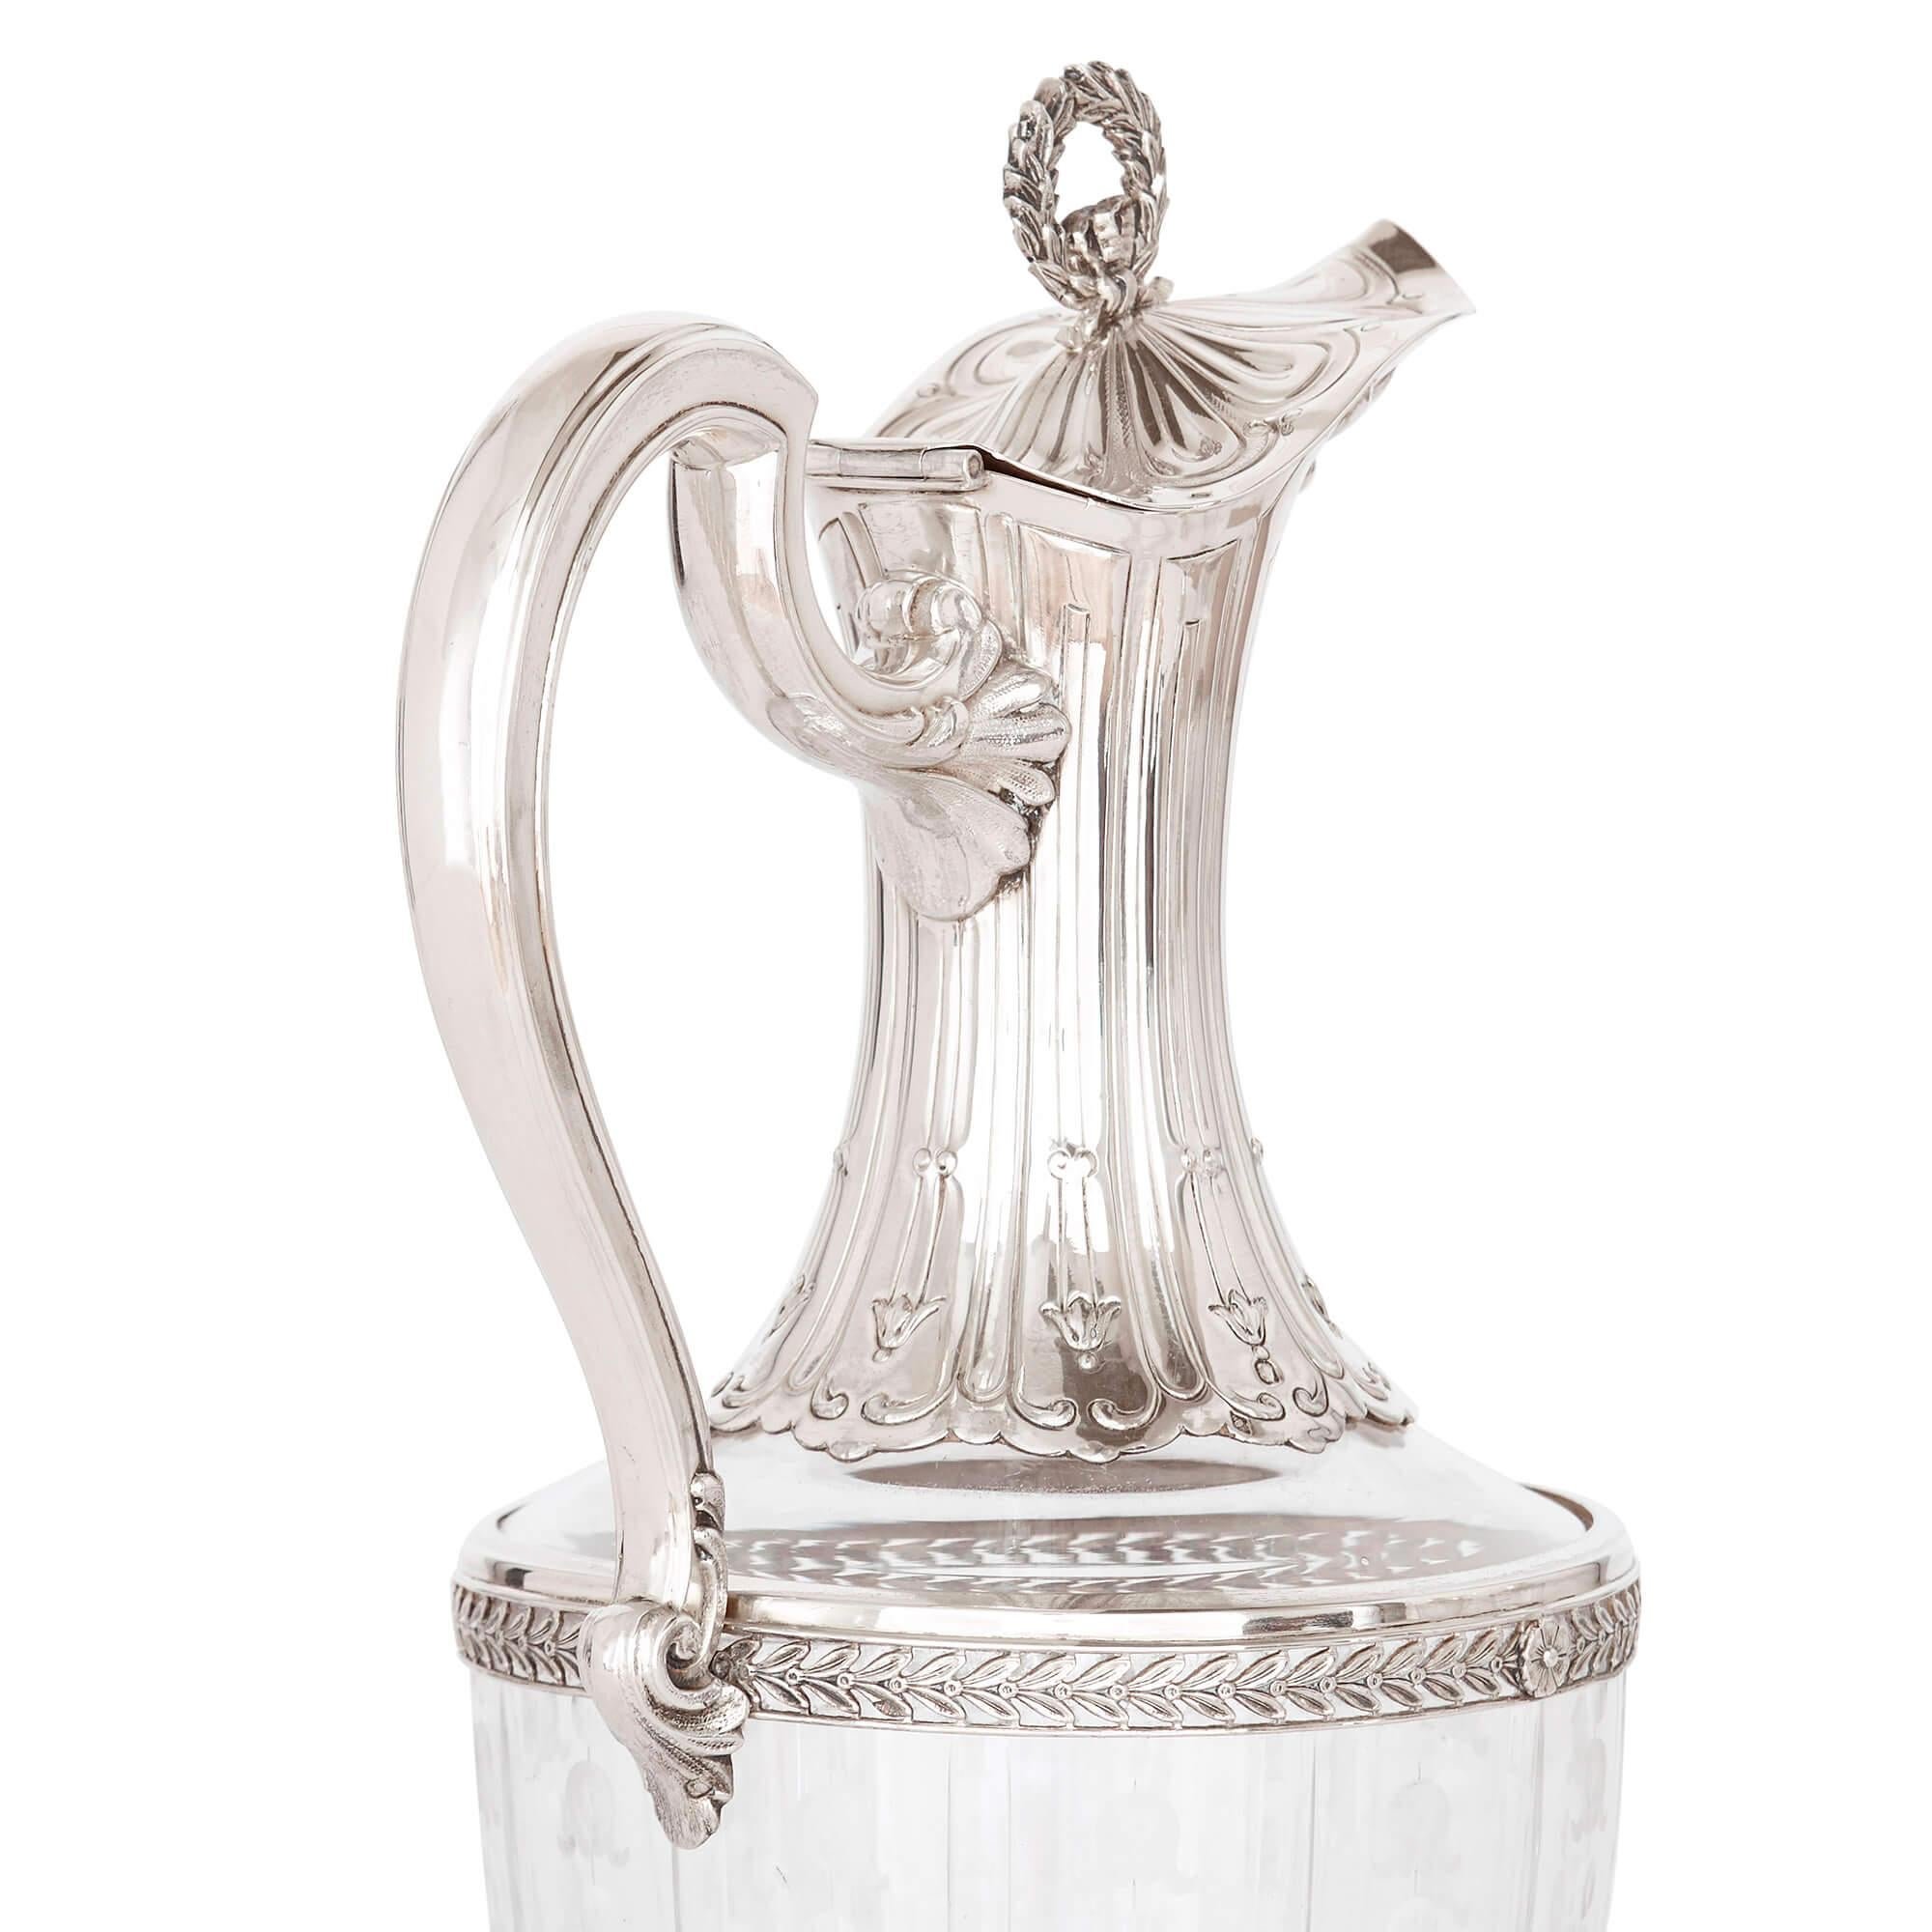 Four Belle Époque Silver and Glass Decanters by Beunke 1